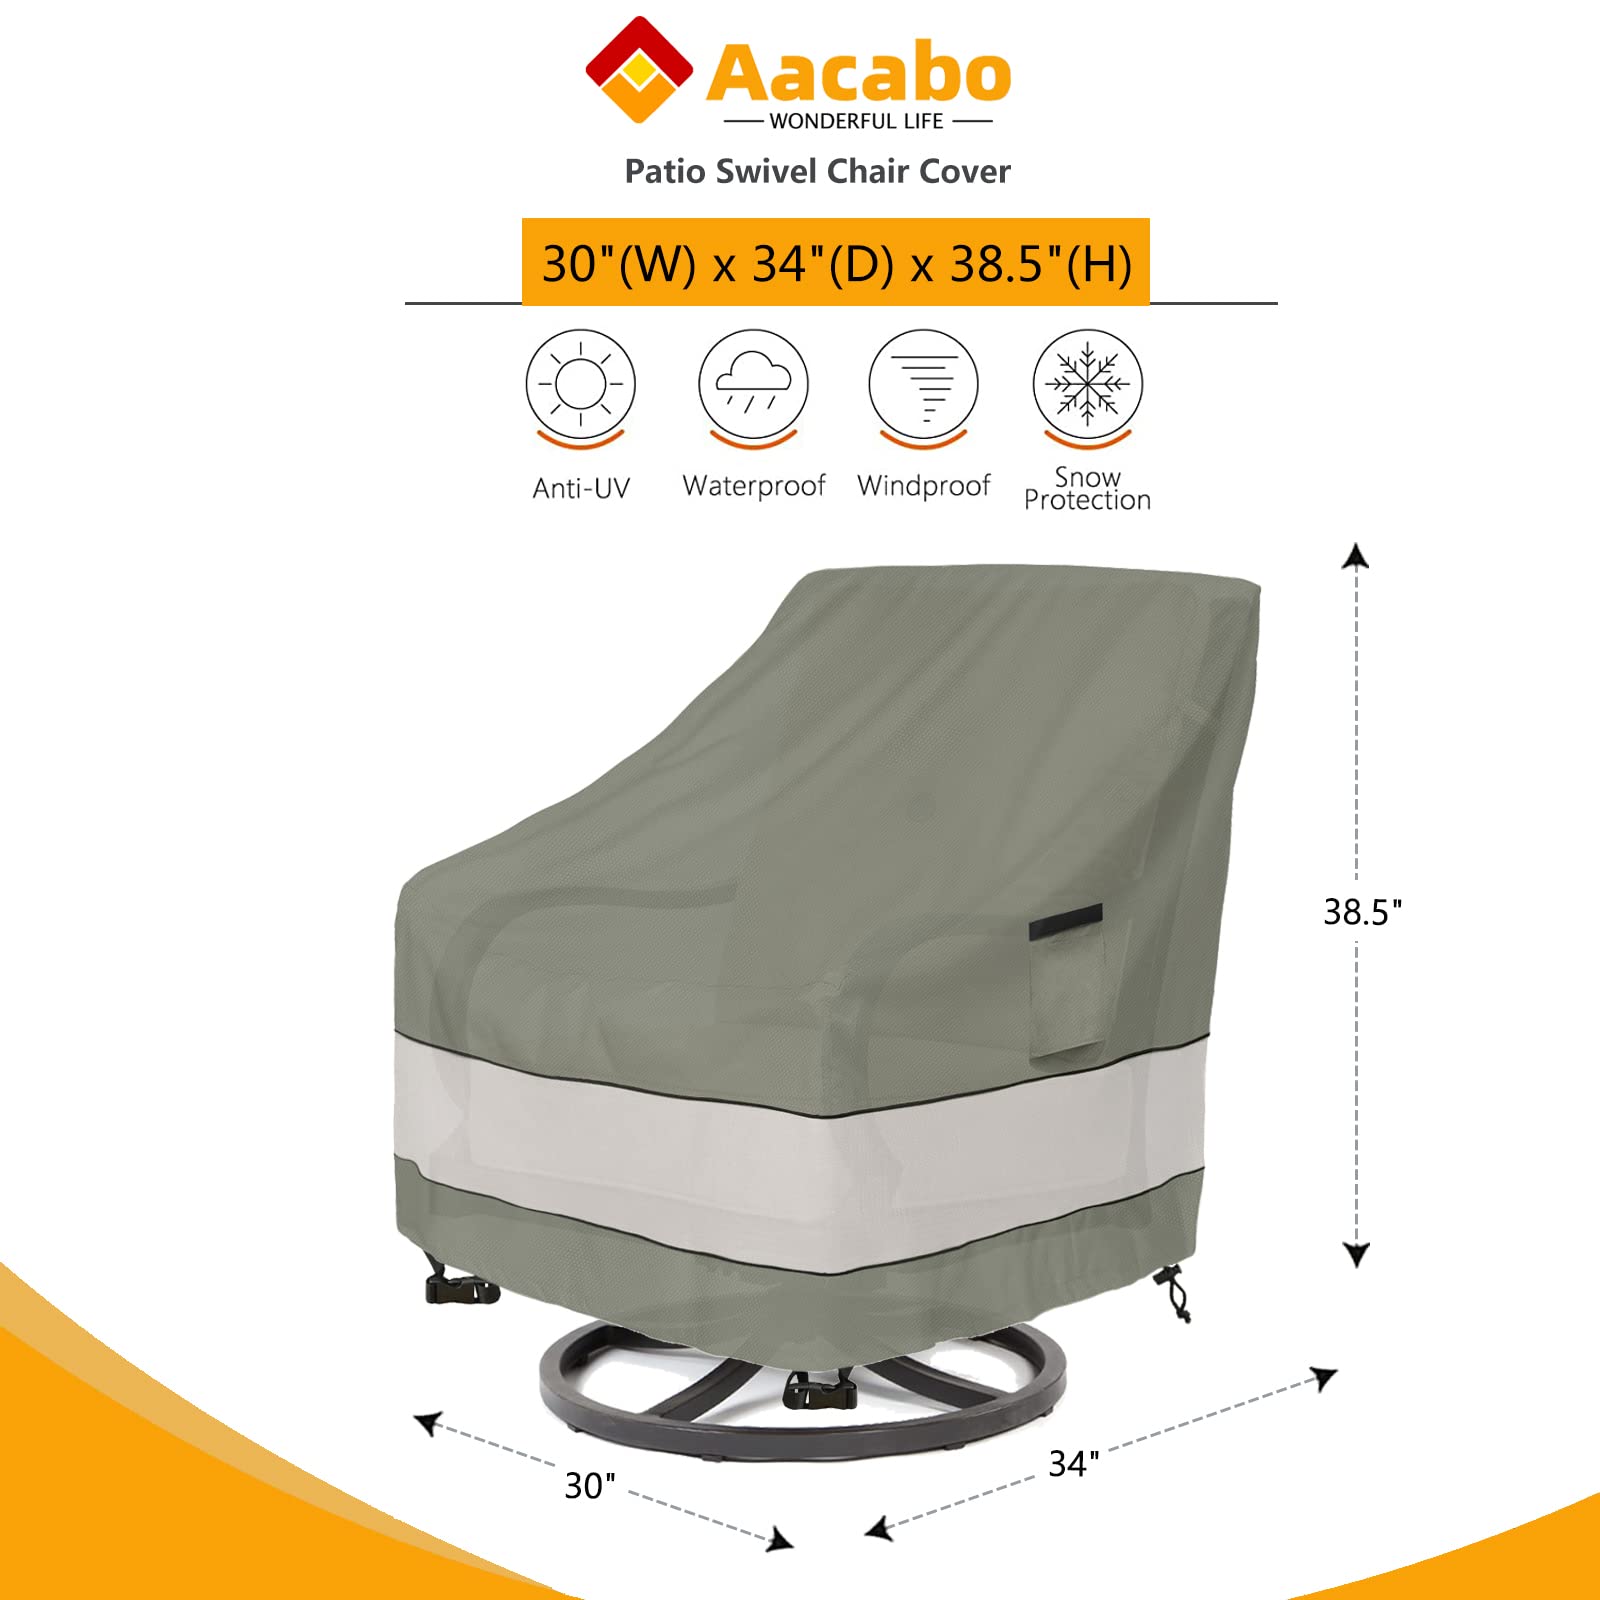 Aacabo Outdoor Swivel Lounge Chair Cover 2 Pack,Waterproof 100% Outdoor Patio Chair Covers,30W x 34 D x 38.5 H inches,Outside Furniture Lounge Deep Seat Cover -Grayish Green